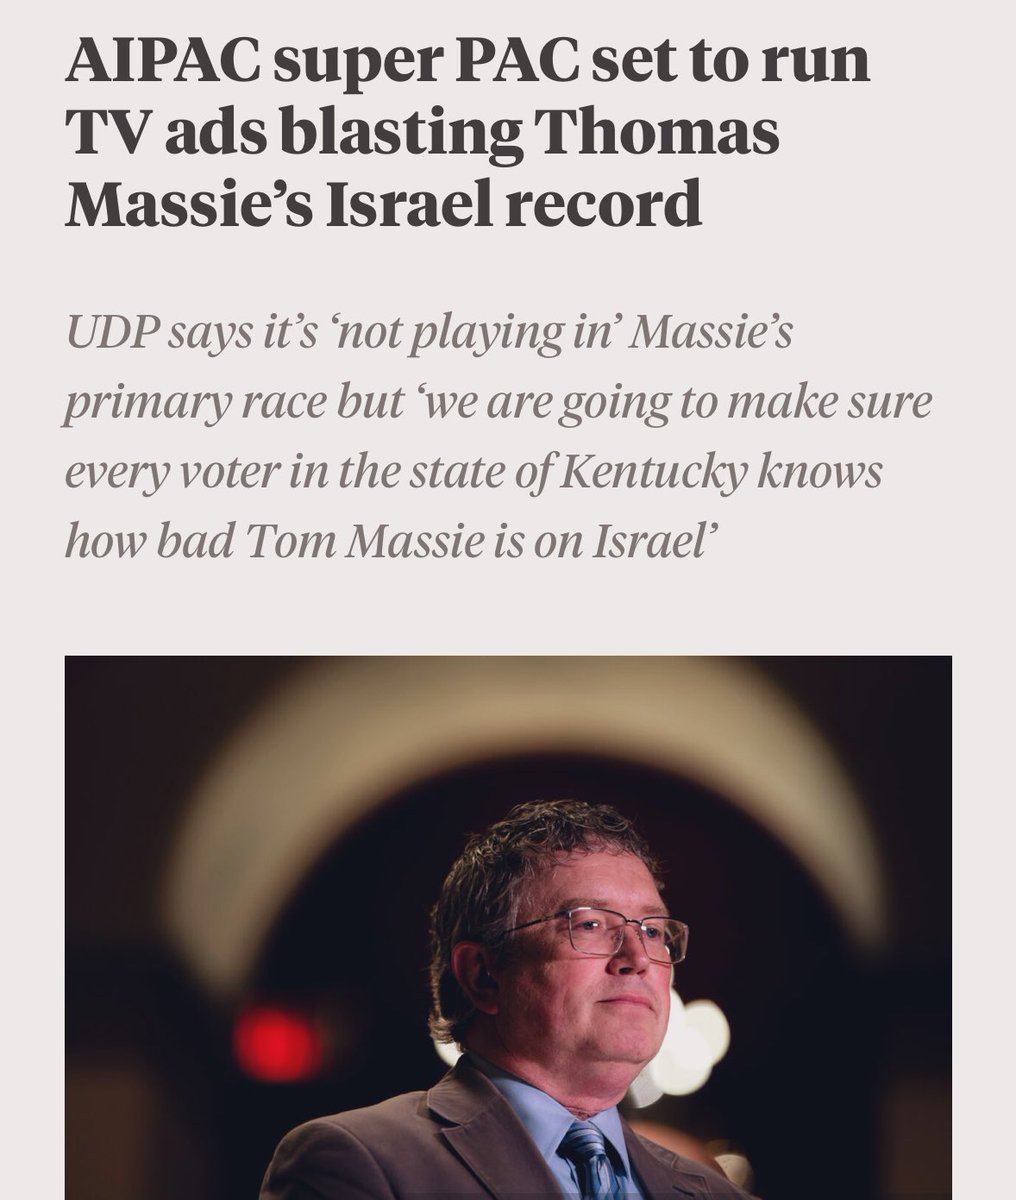 My election is in 12 days. AIPAC superPAC just bought $300,000 of ads against me because I am often the lone Republican for freedom of speech, against foreign aid, and opposed to wars in the Middle East. I am urgently requesting your financial help here: secure.thomasmassie.com/donate